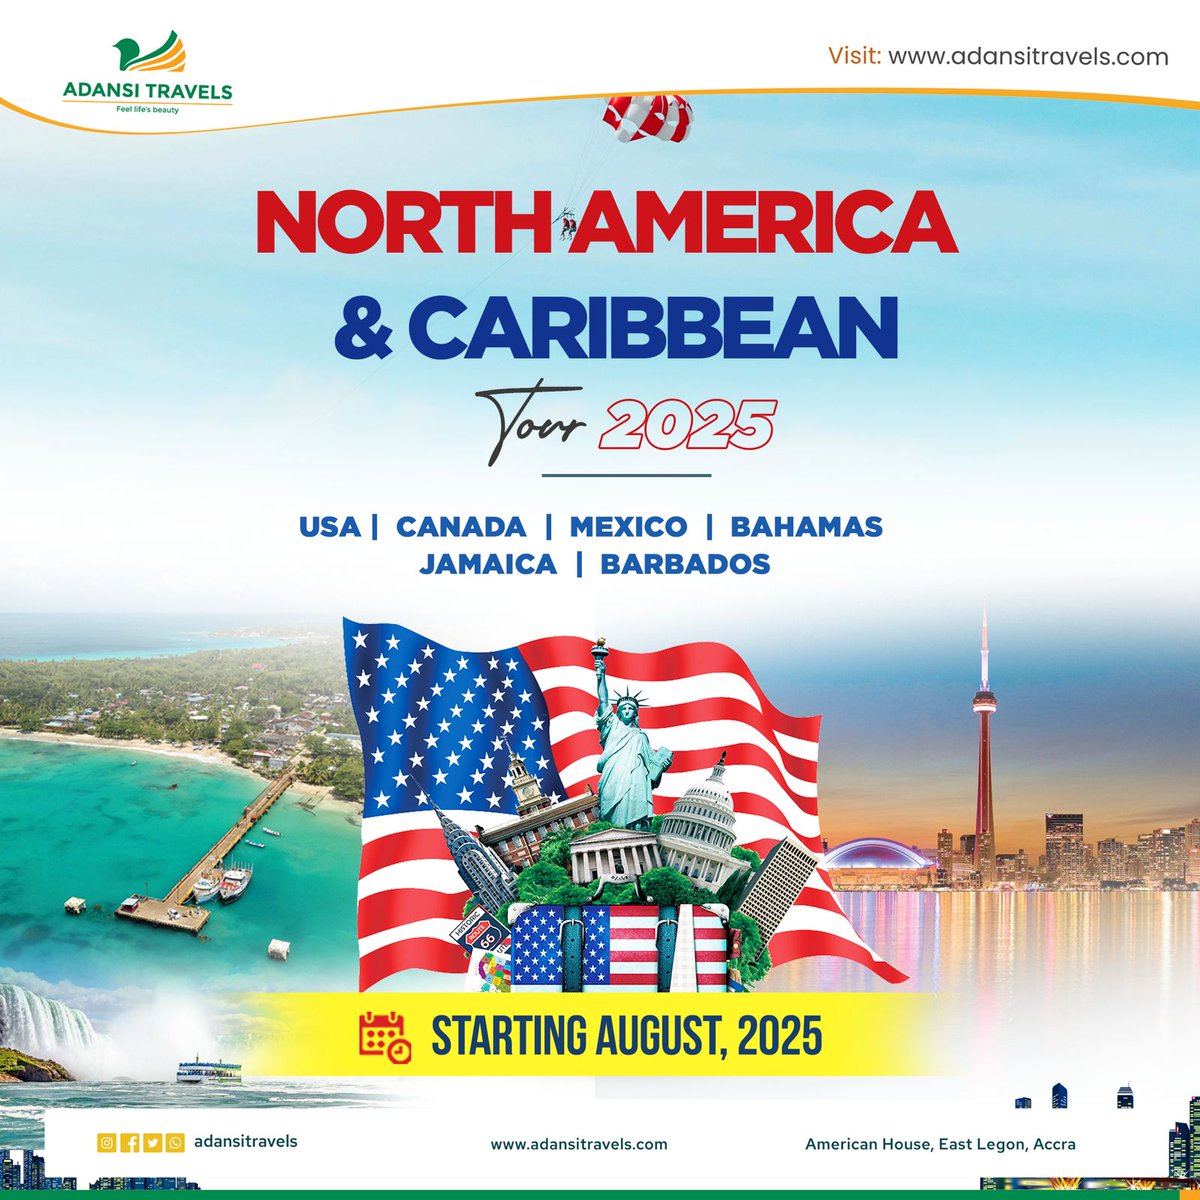 Imagine epic road trips through North America to unwinding on tropical islands in the Caribbean. Let's turn your imagination into a reality with our 2025 North America and Caribbean packages. Ready? ☎️ : 0595500817 #adansitravels #travel #USA #Canada #Europe #Barbados